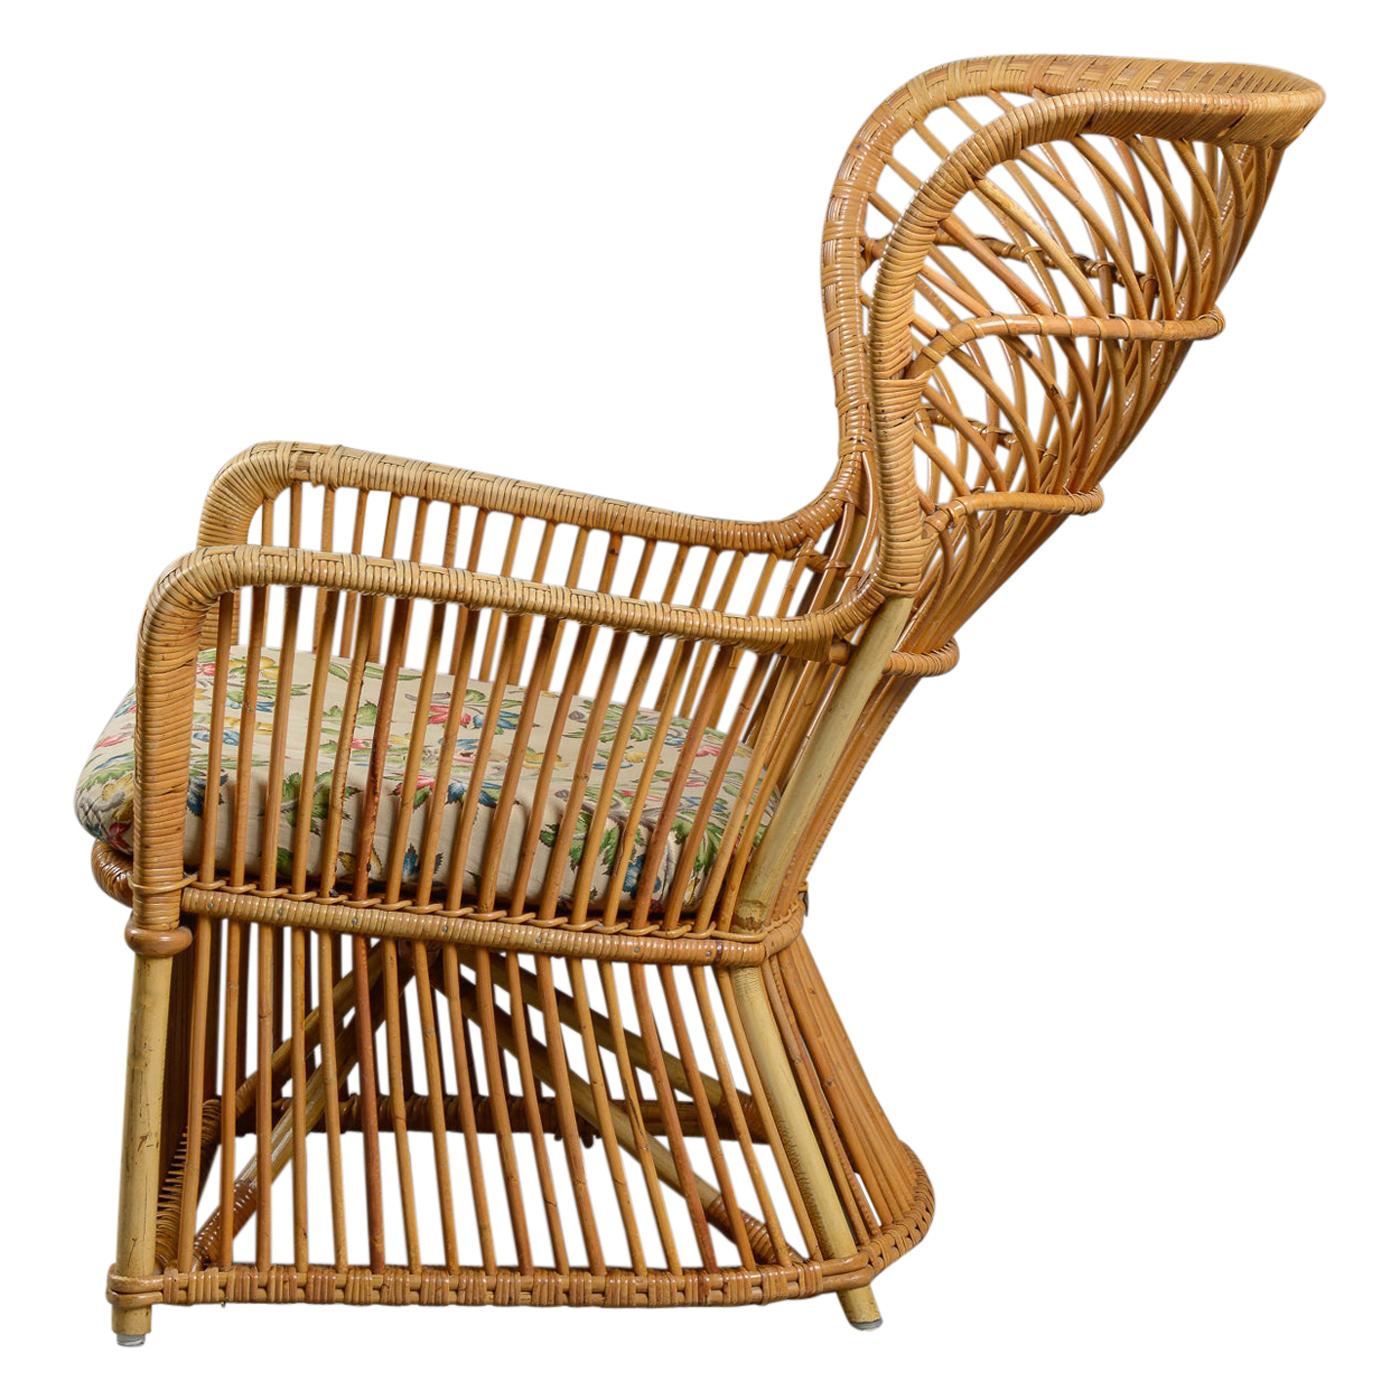 R. Wengler, Wingback Wicker Chair with Plaque from R. Wengler, Copenhagen For Sale